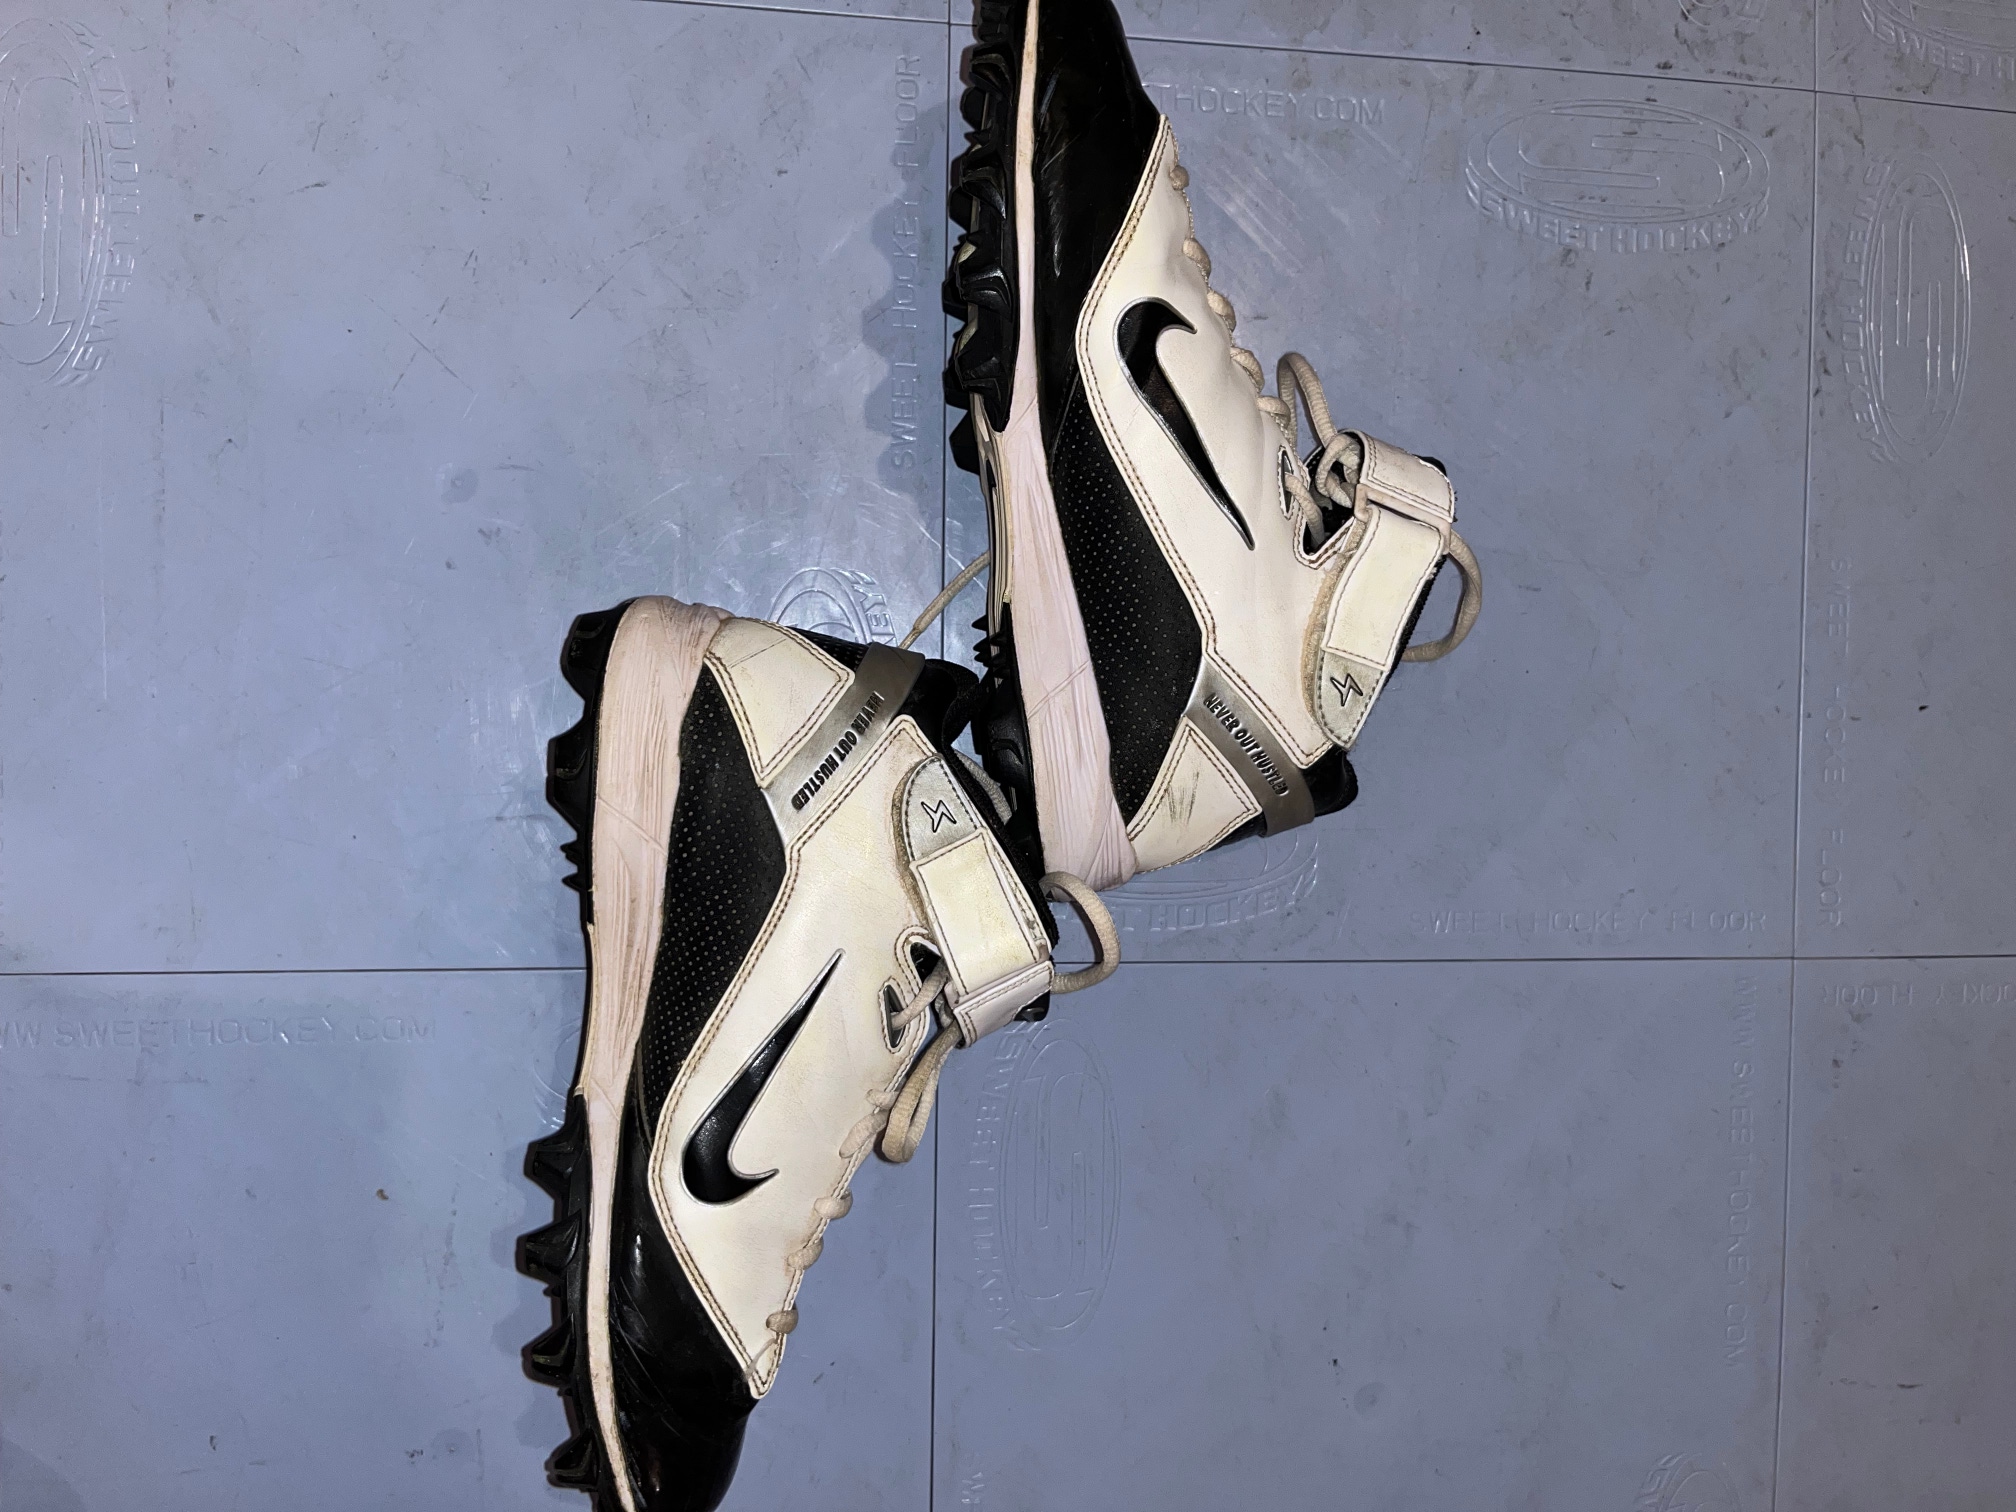 Men's Used Size 6.5 Nike Football Cleats